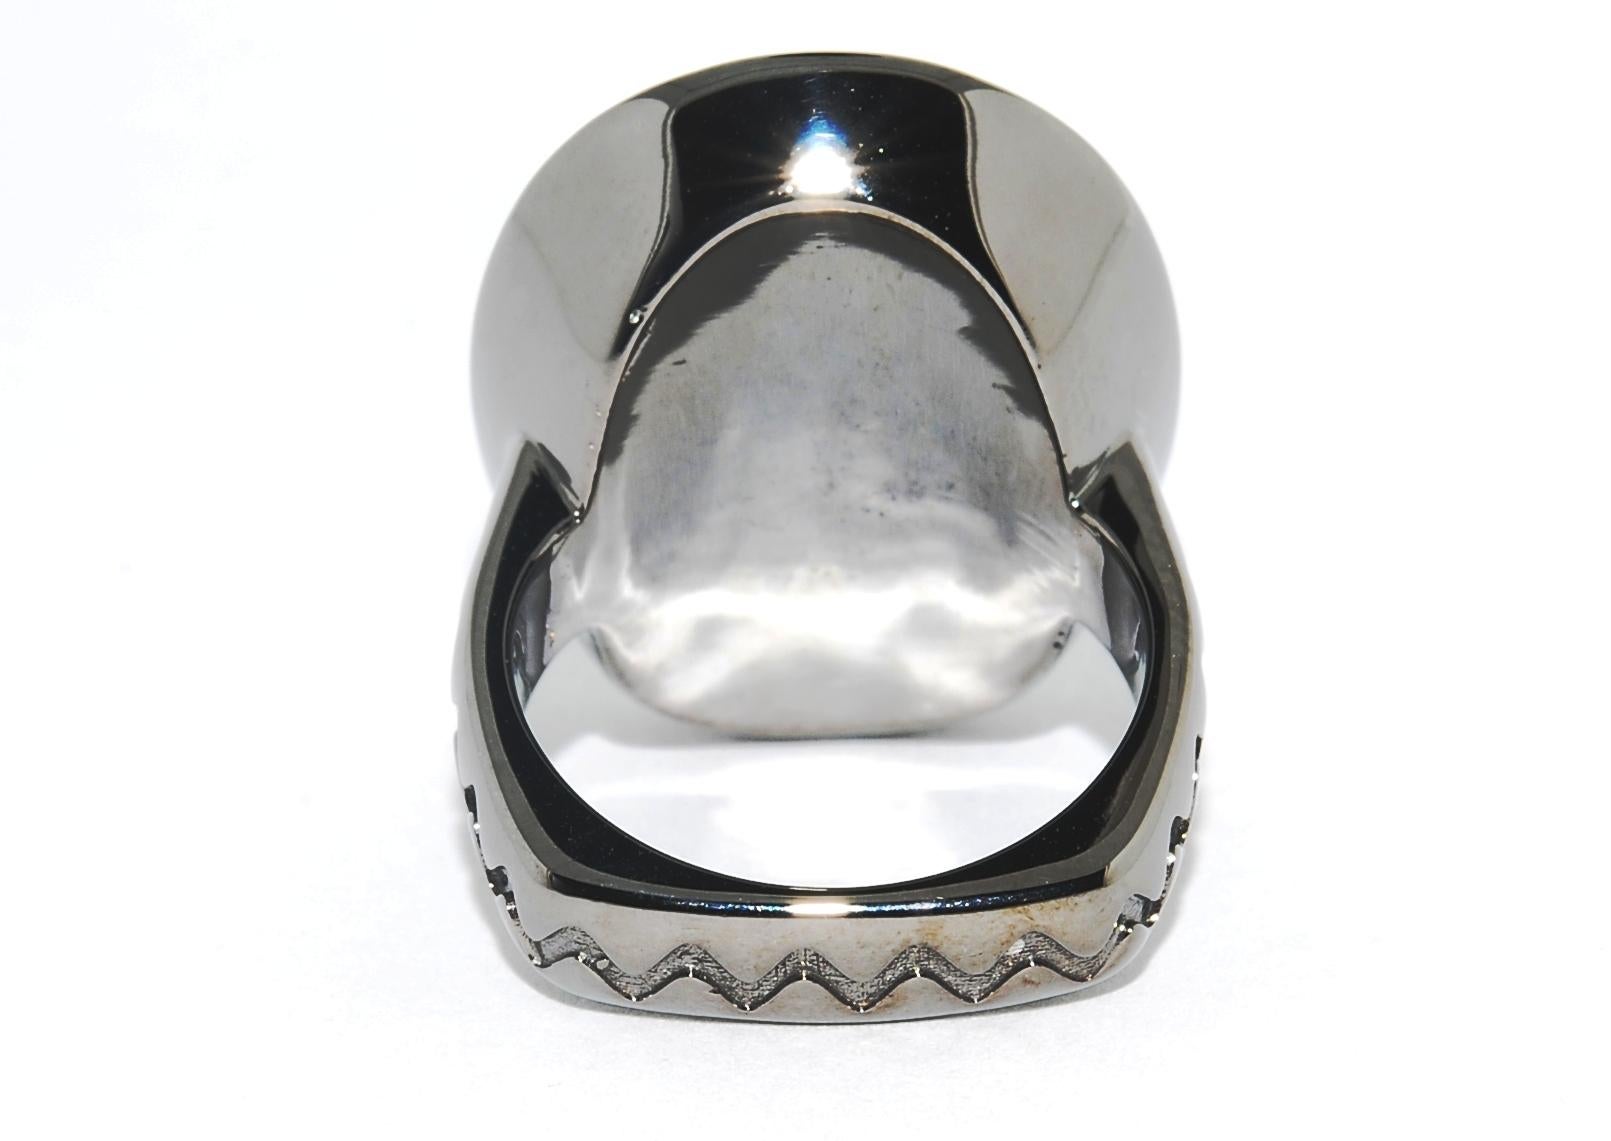 Mystical Aquamarine Cabochon Ring with Black Diamonds in Blackened White Gold In New Condition For Sale In Lake Havasu City, AZ